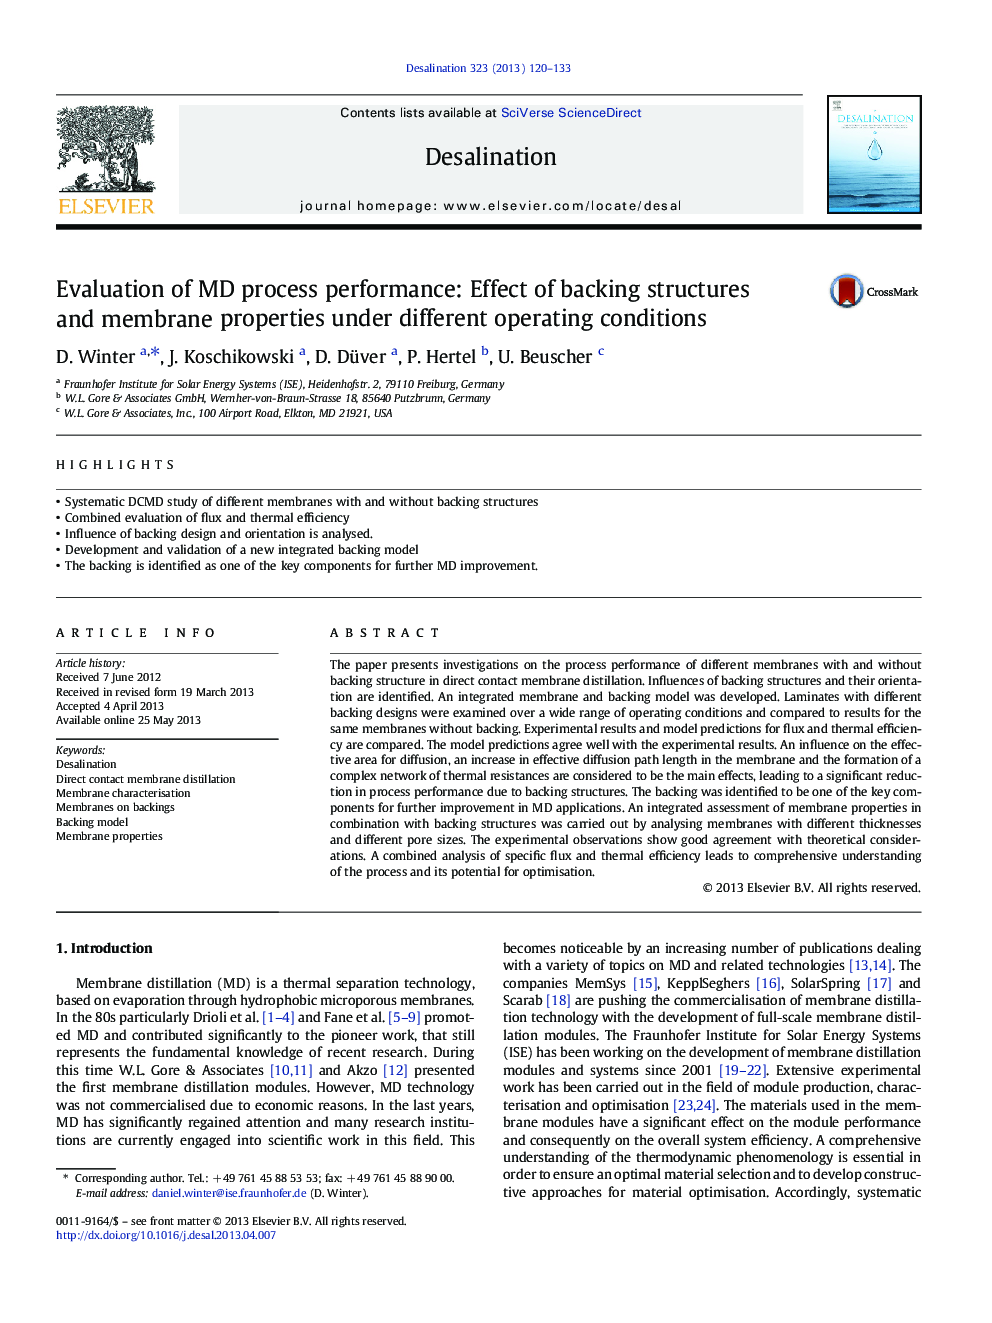 Evaluation of MD process performance: Effect of backing structures and membrane properties under different operating conditions